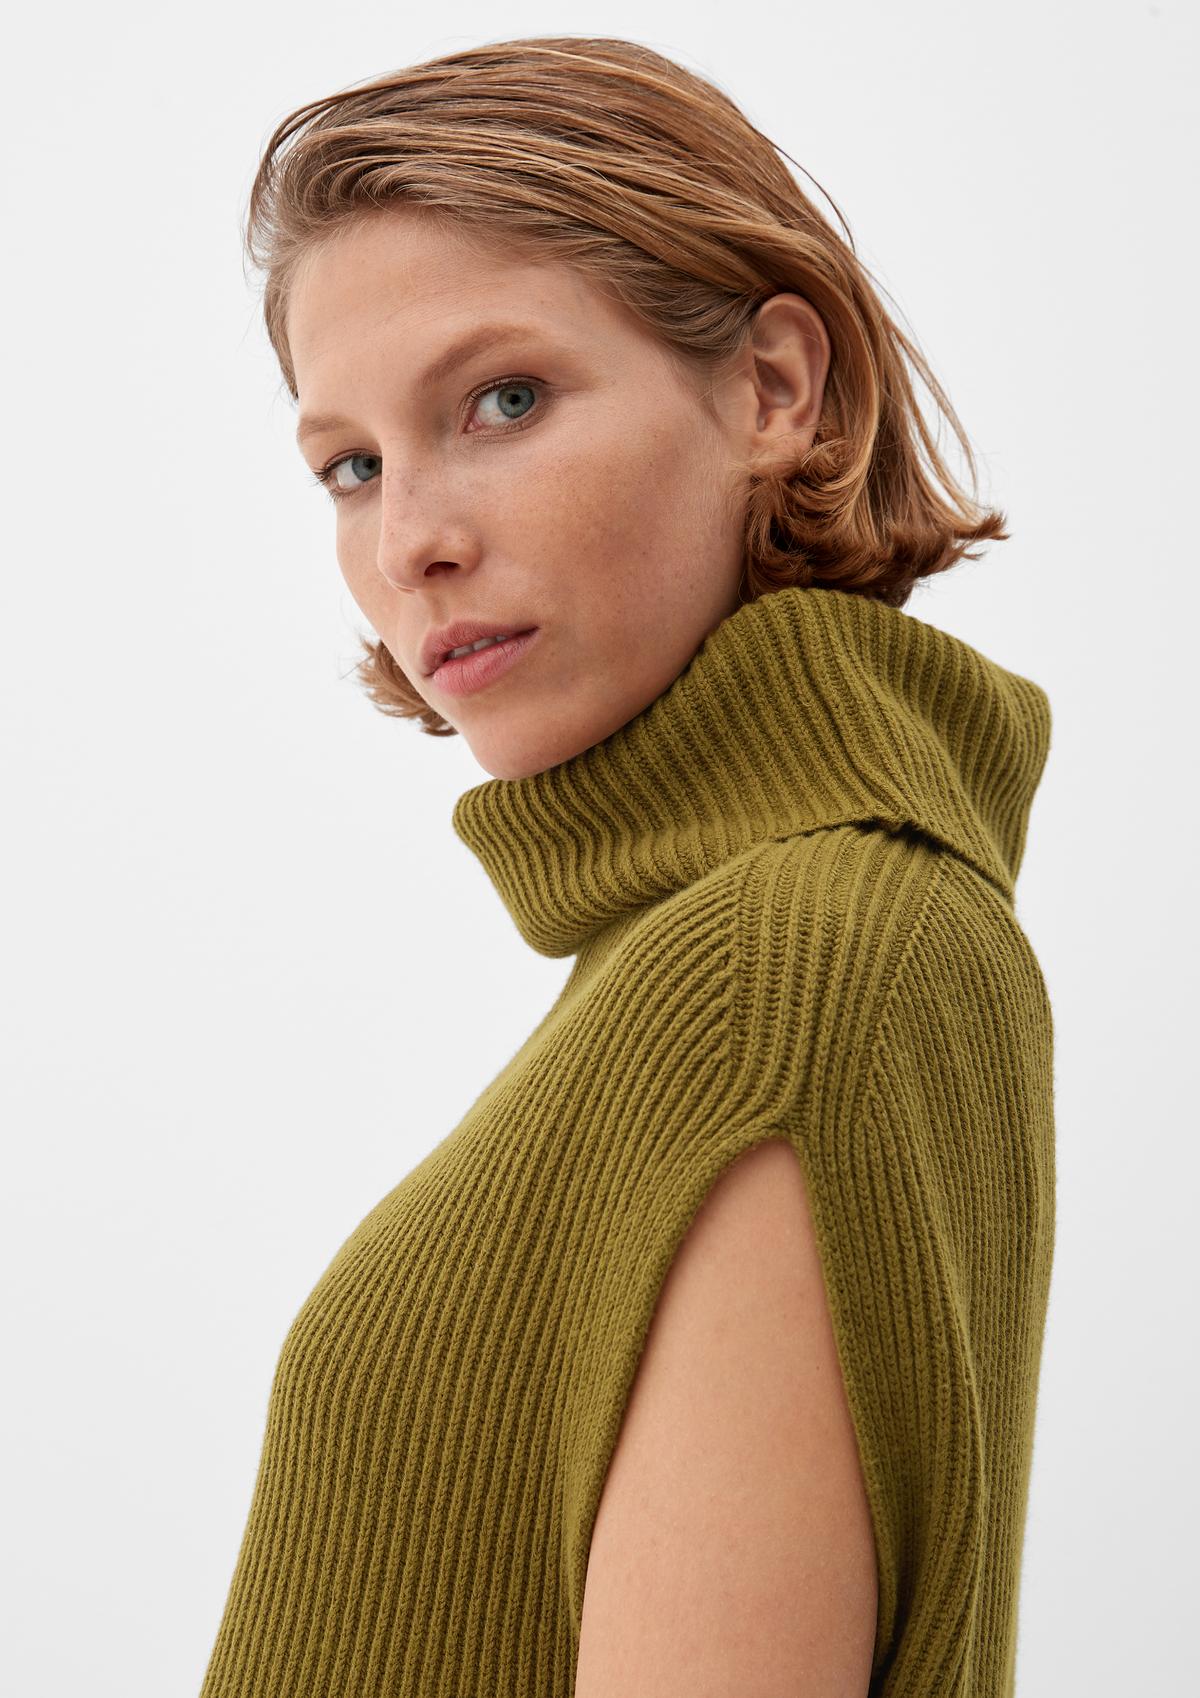 s.Oliver Polo neck sleeveless knitted jumper